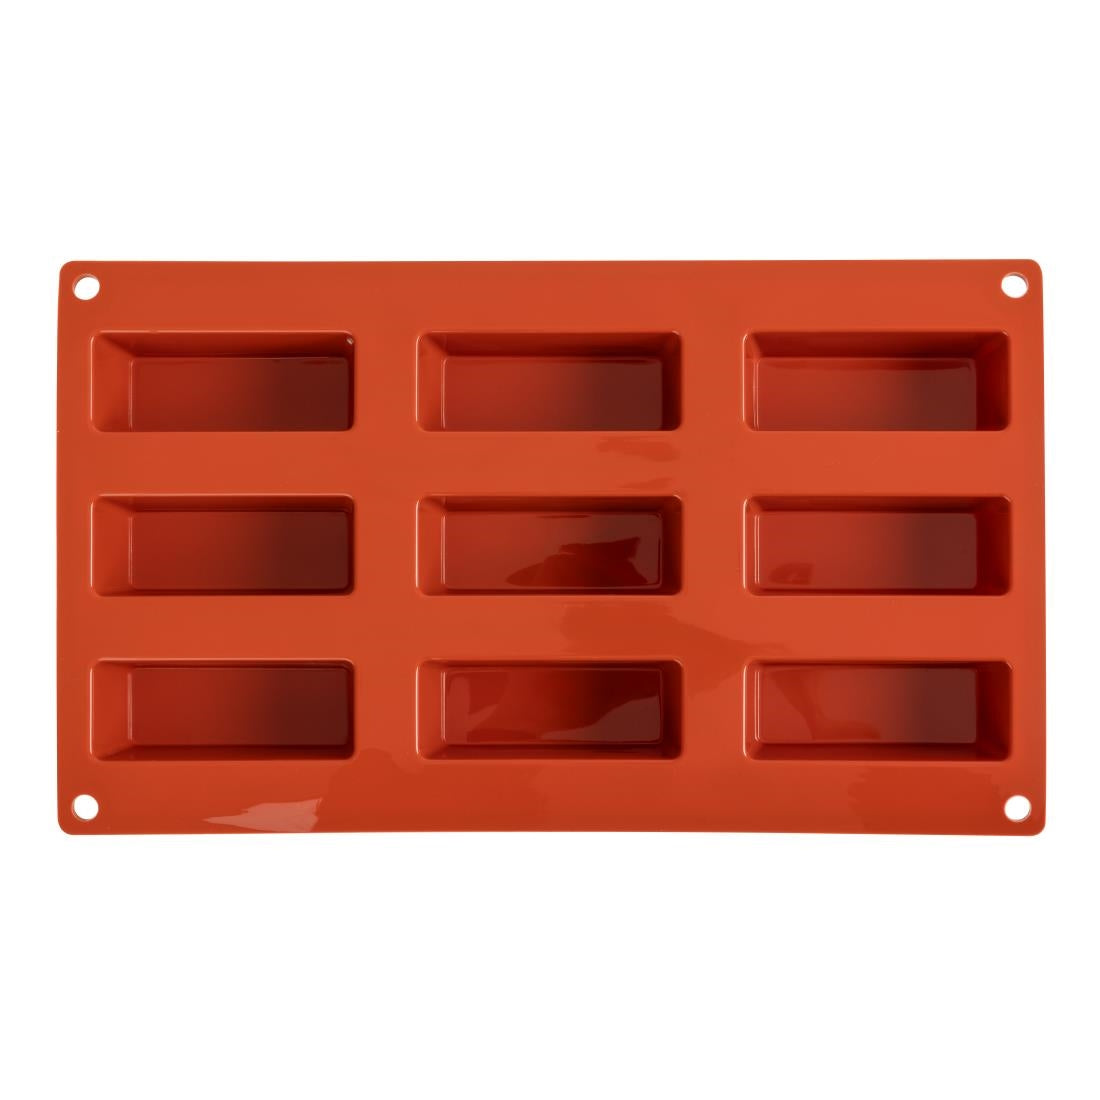 Pavoni Formaflex Silicone Cake Mould 9 Cup